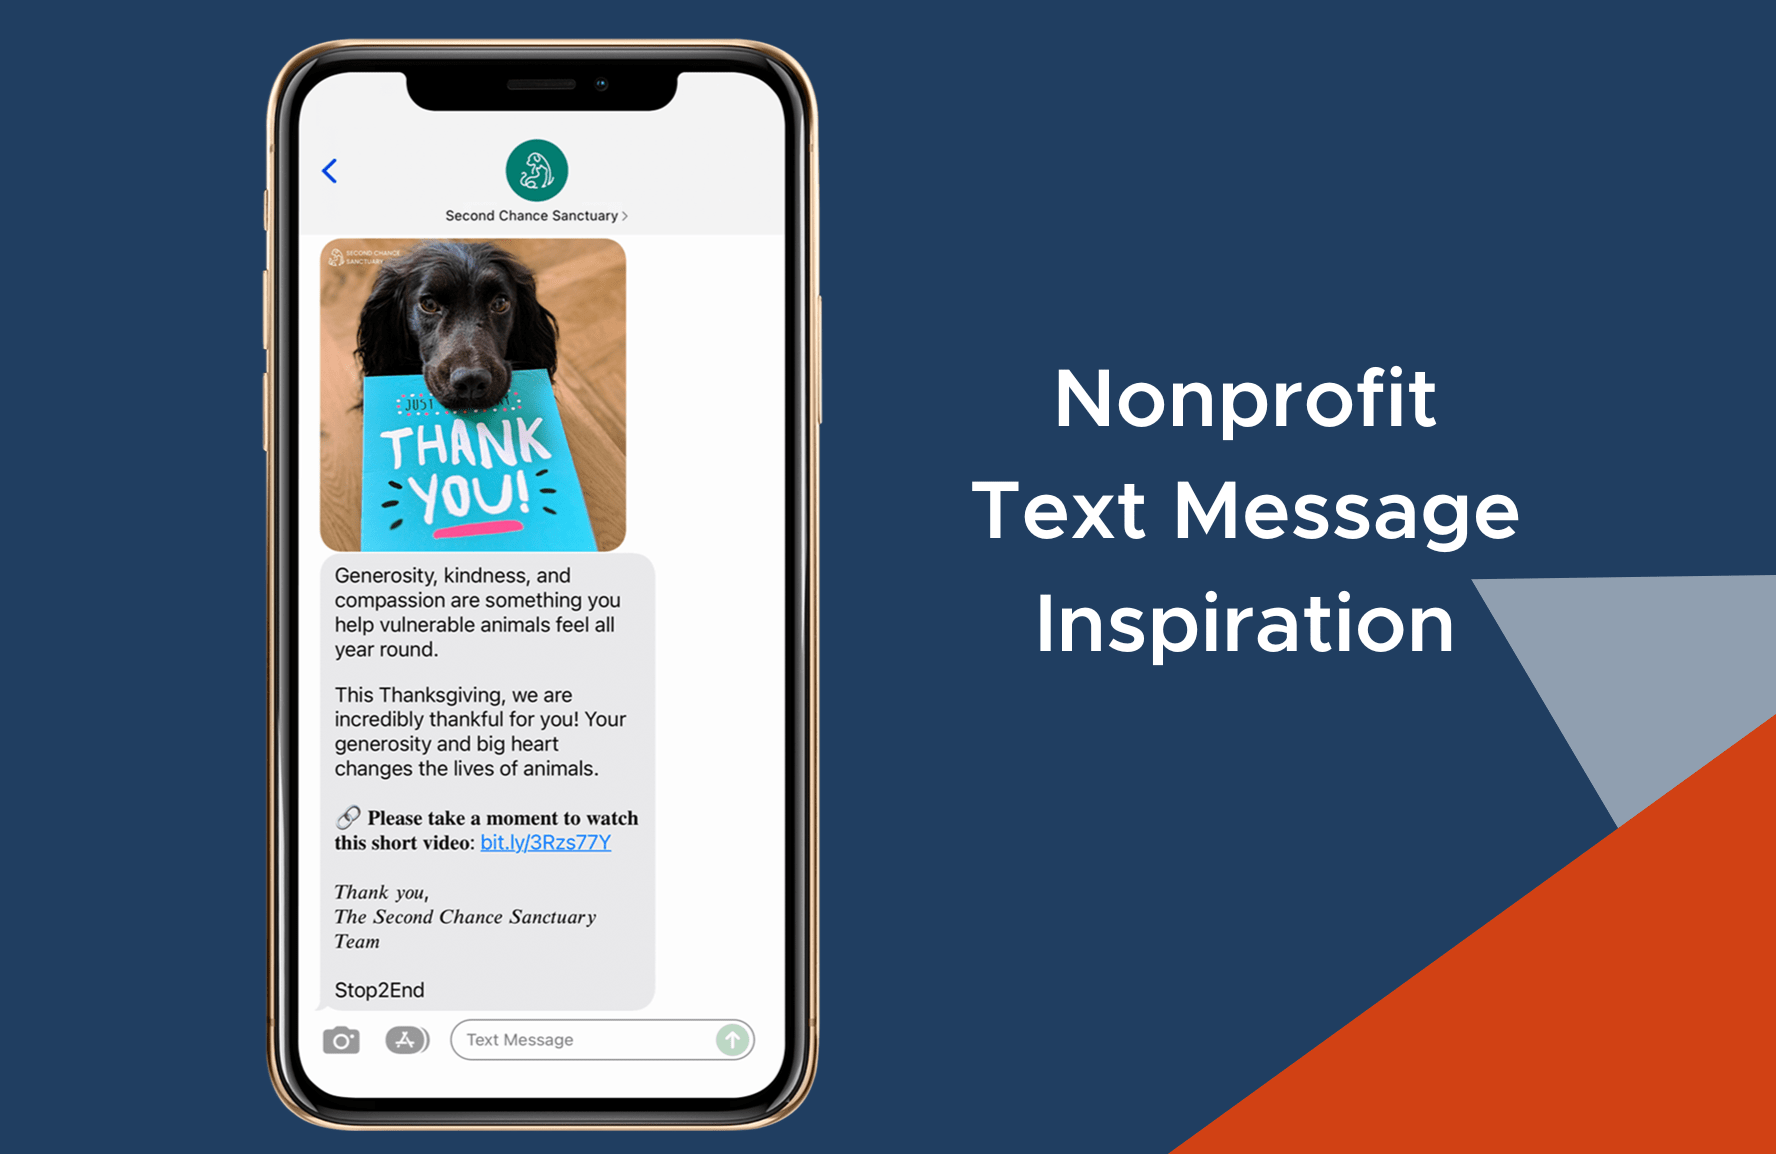 Quick Text Message Links to Engage Supporters - GiveSignup